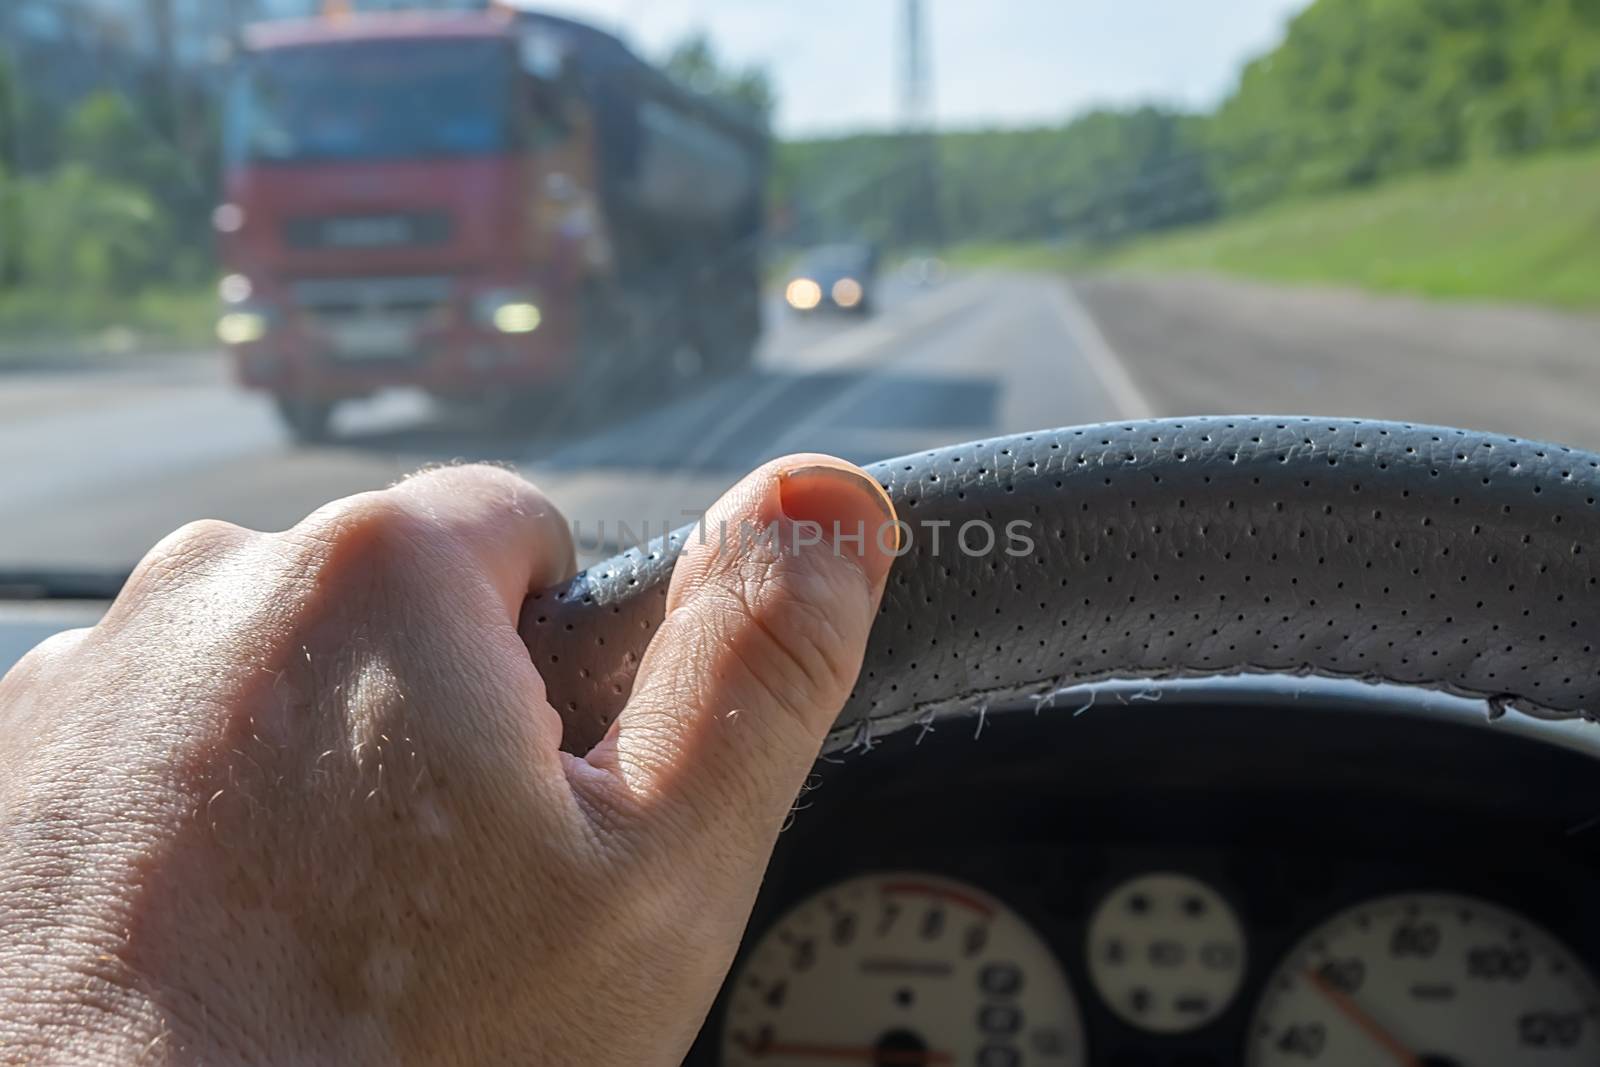 driver's hand on the steering wheel of a car and a passing truck by jk3030